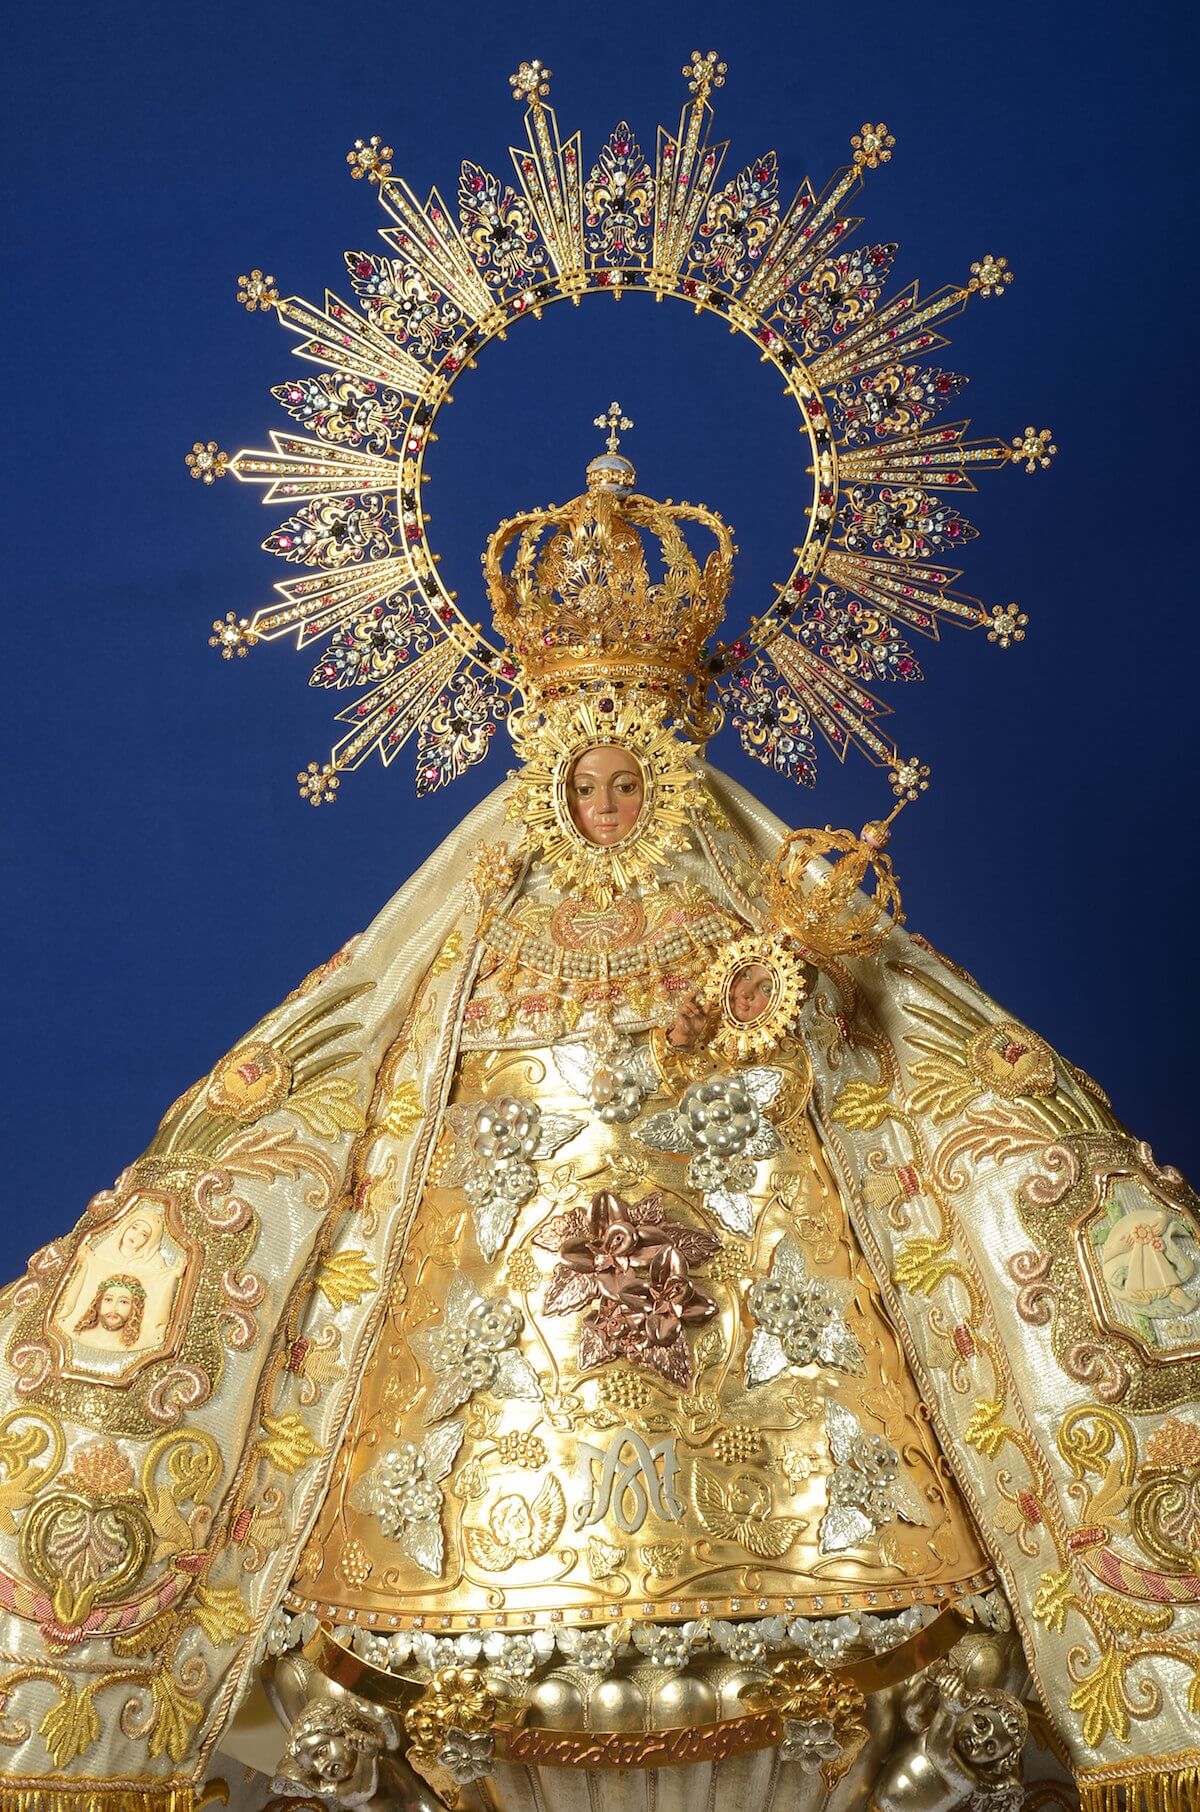 Image of Our Lady of Penafrancia